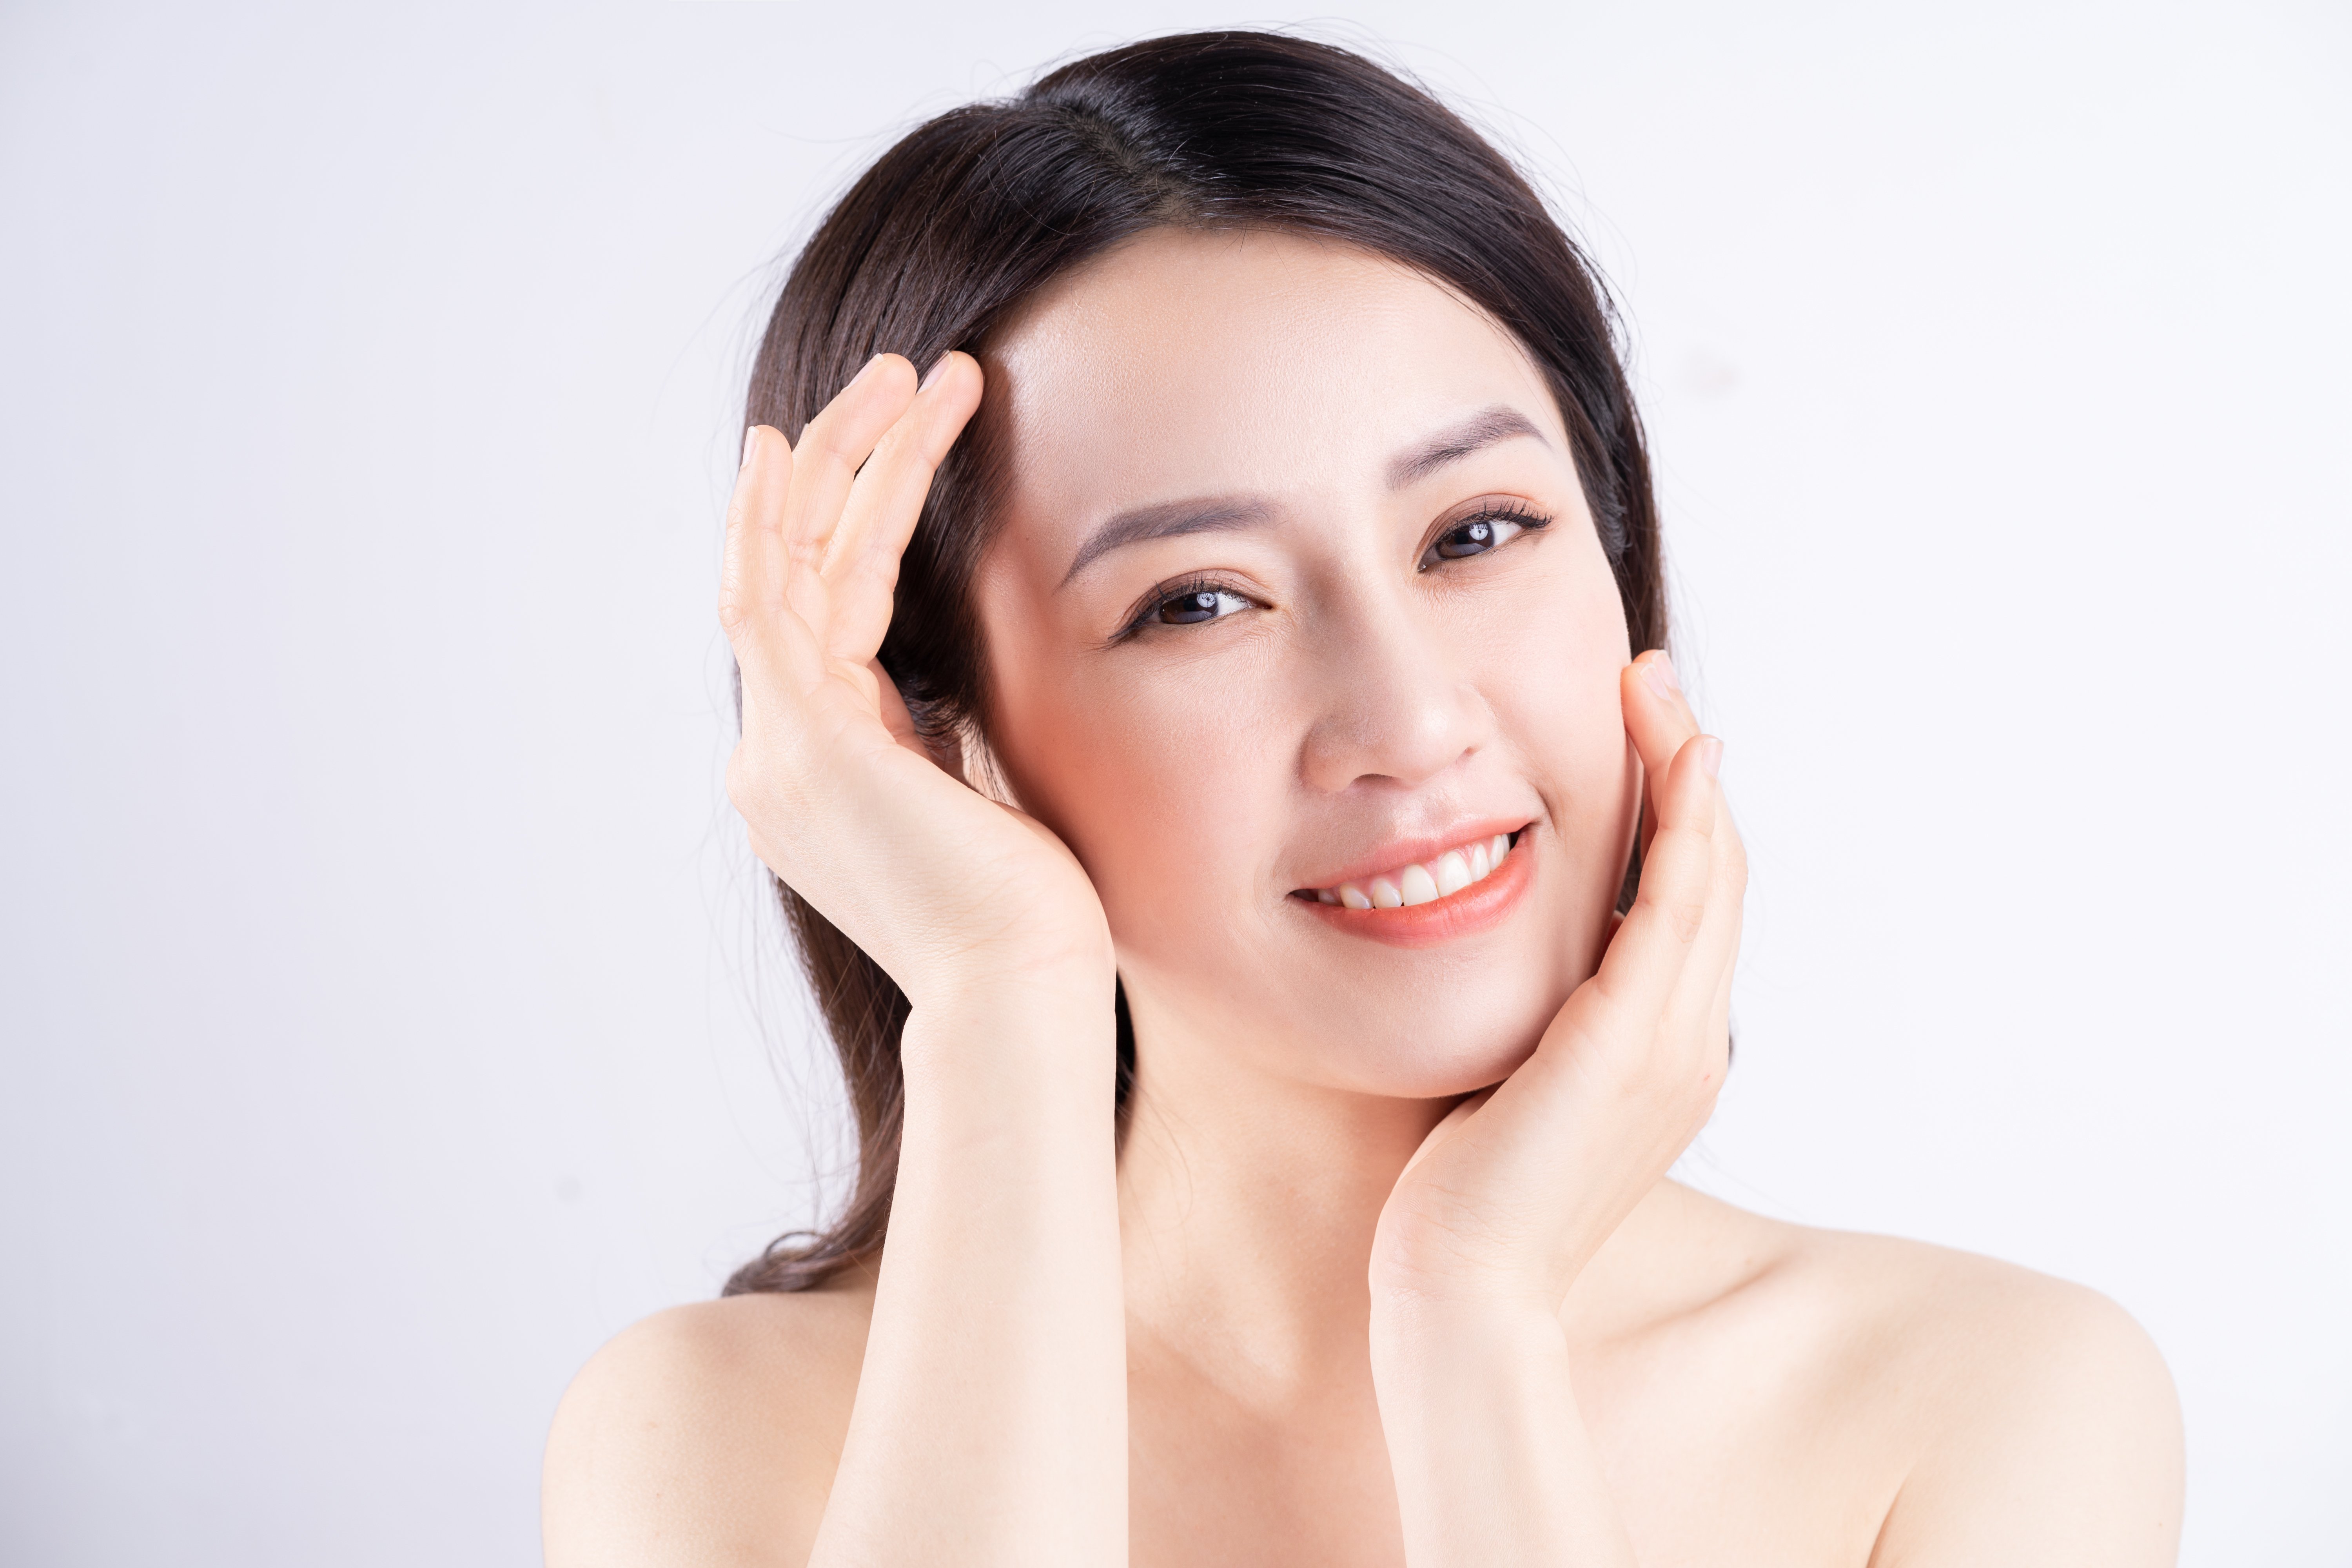 Woman with clear skin posing | Shutterstock 